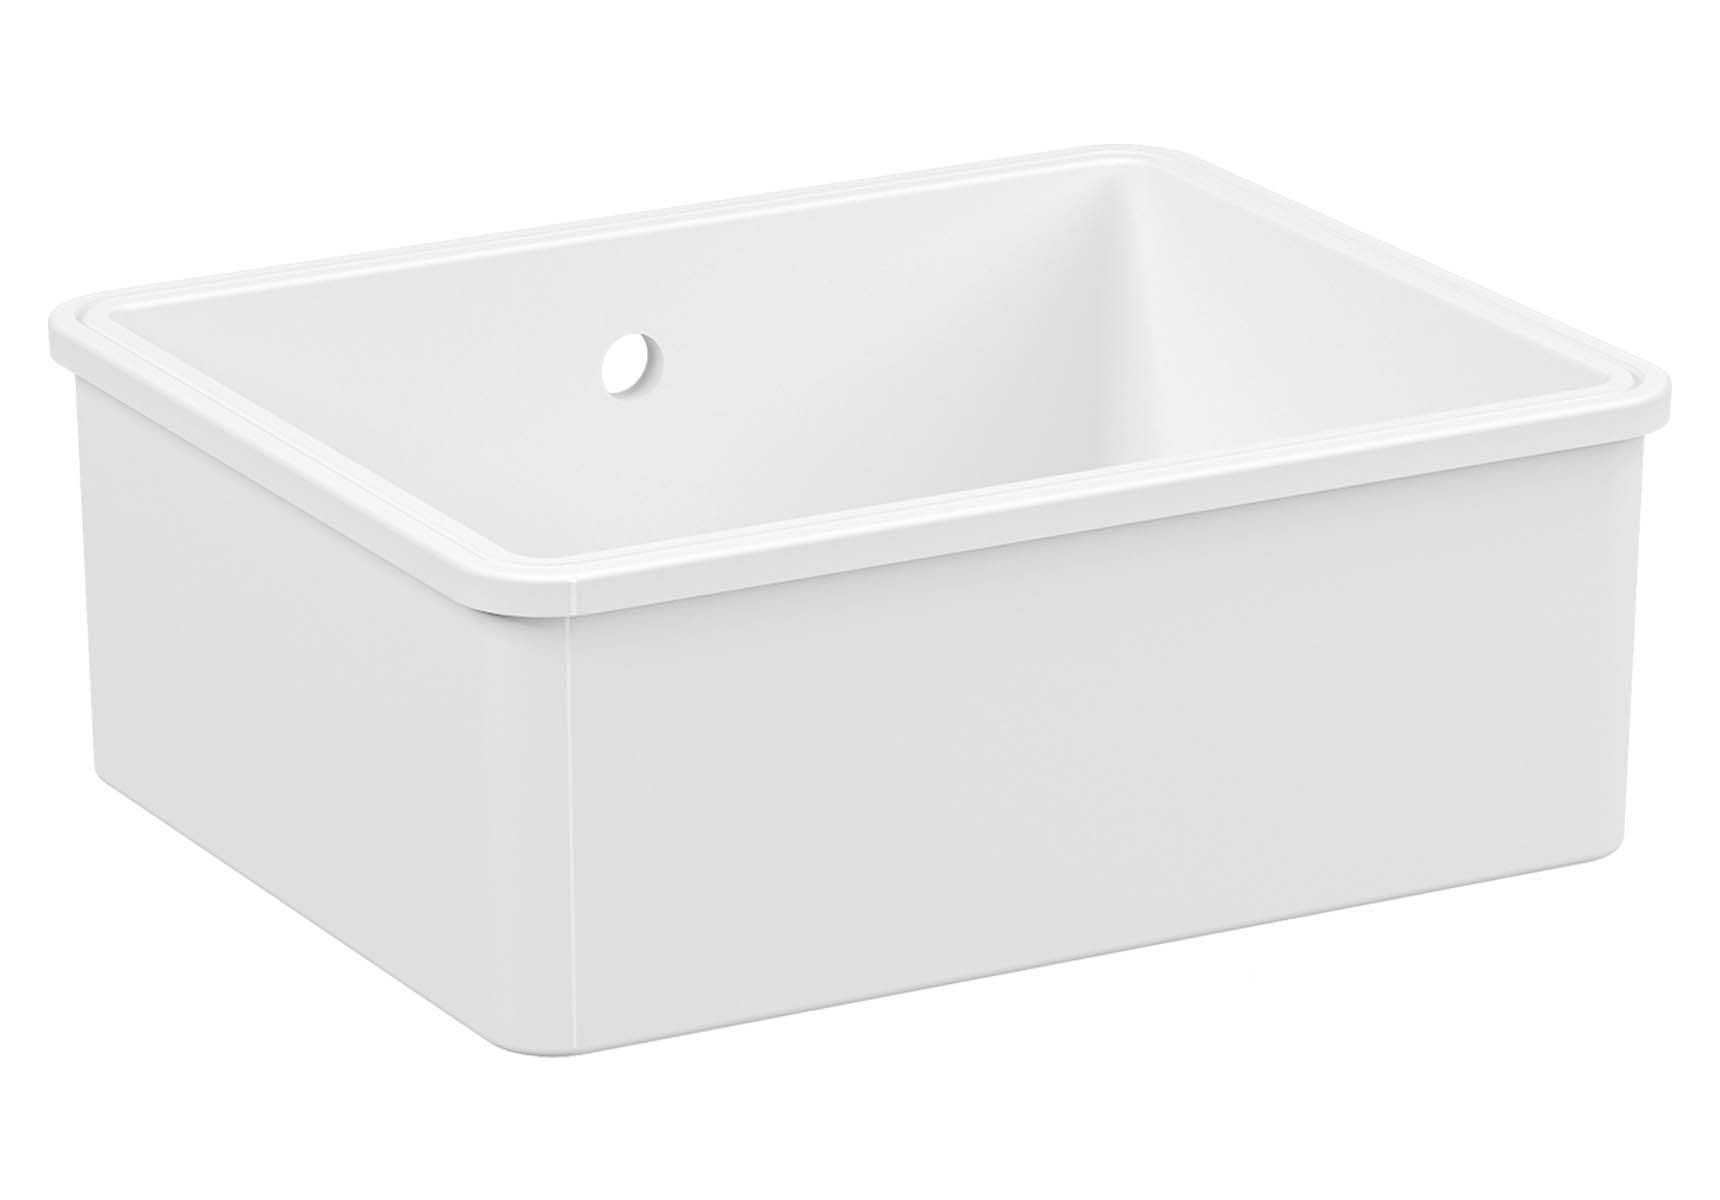 Undercounter Sink, 55 cm, 1 bowl, without tap hole, with overflow hole, white